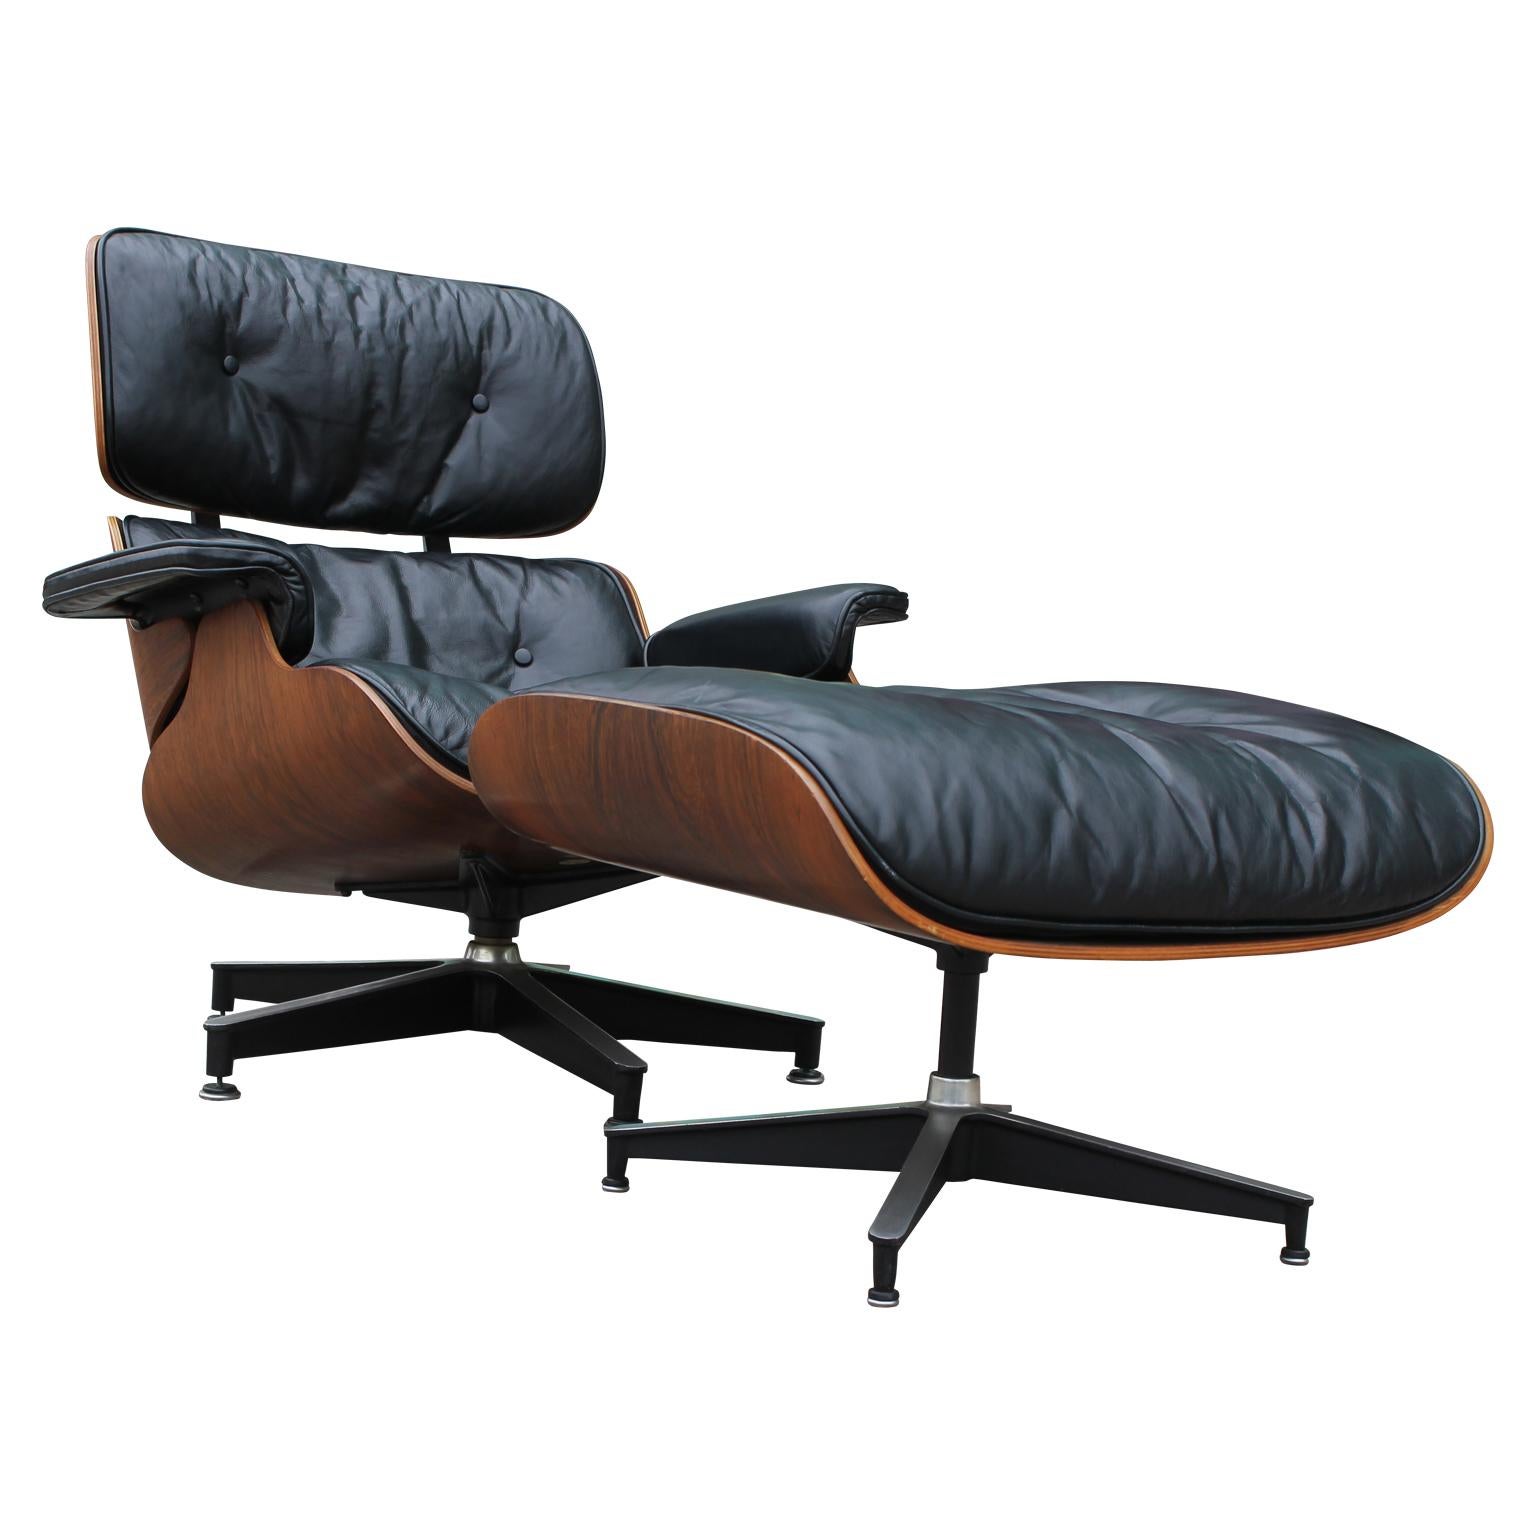 Lovely modern black leather and rosewood Eames lounge chair and ottoman for Herman Miller.

Dimensions of ottoman: 25.5 in W x 22 in D x 17.5 in H.